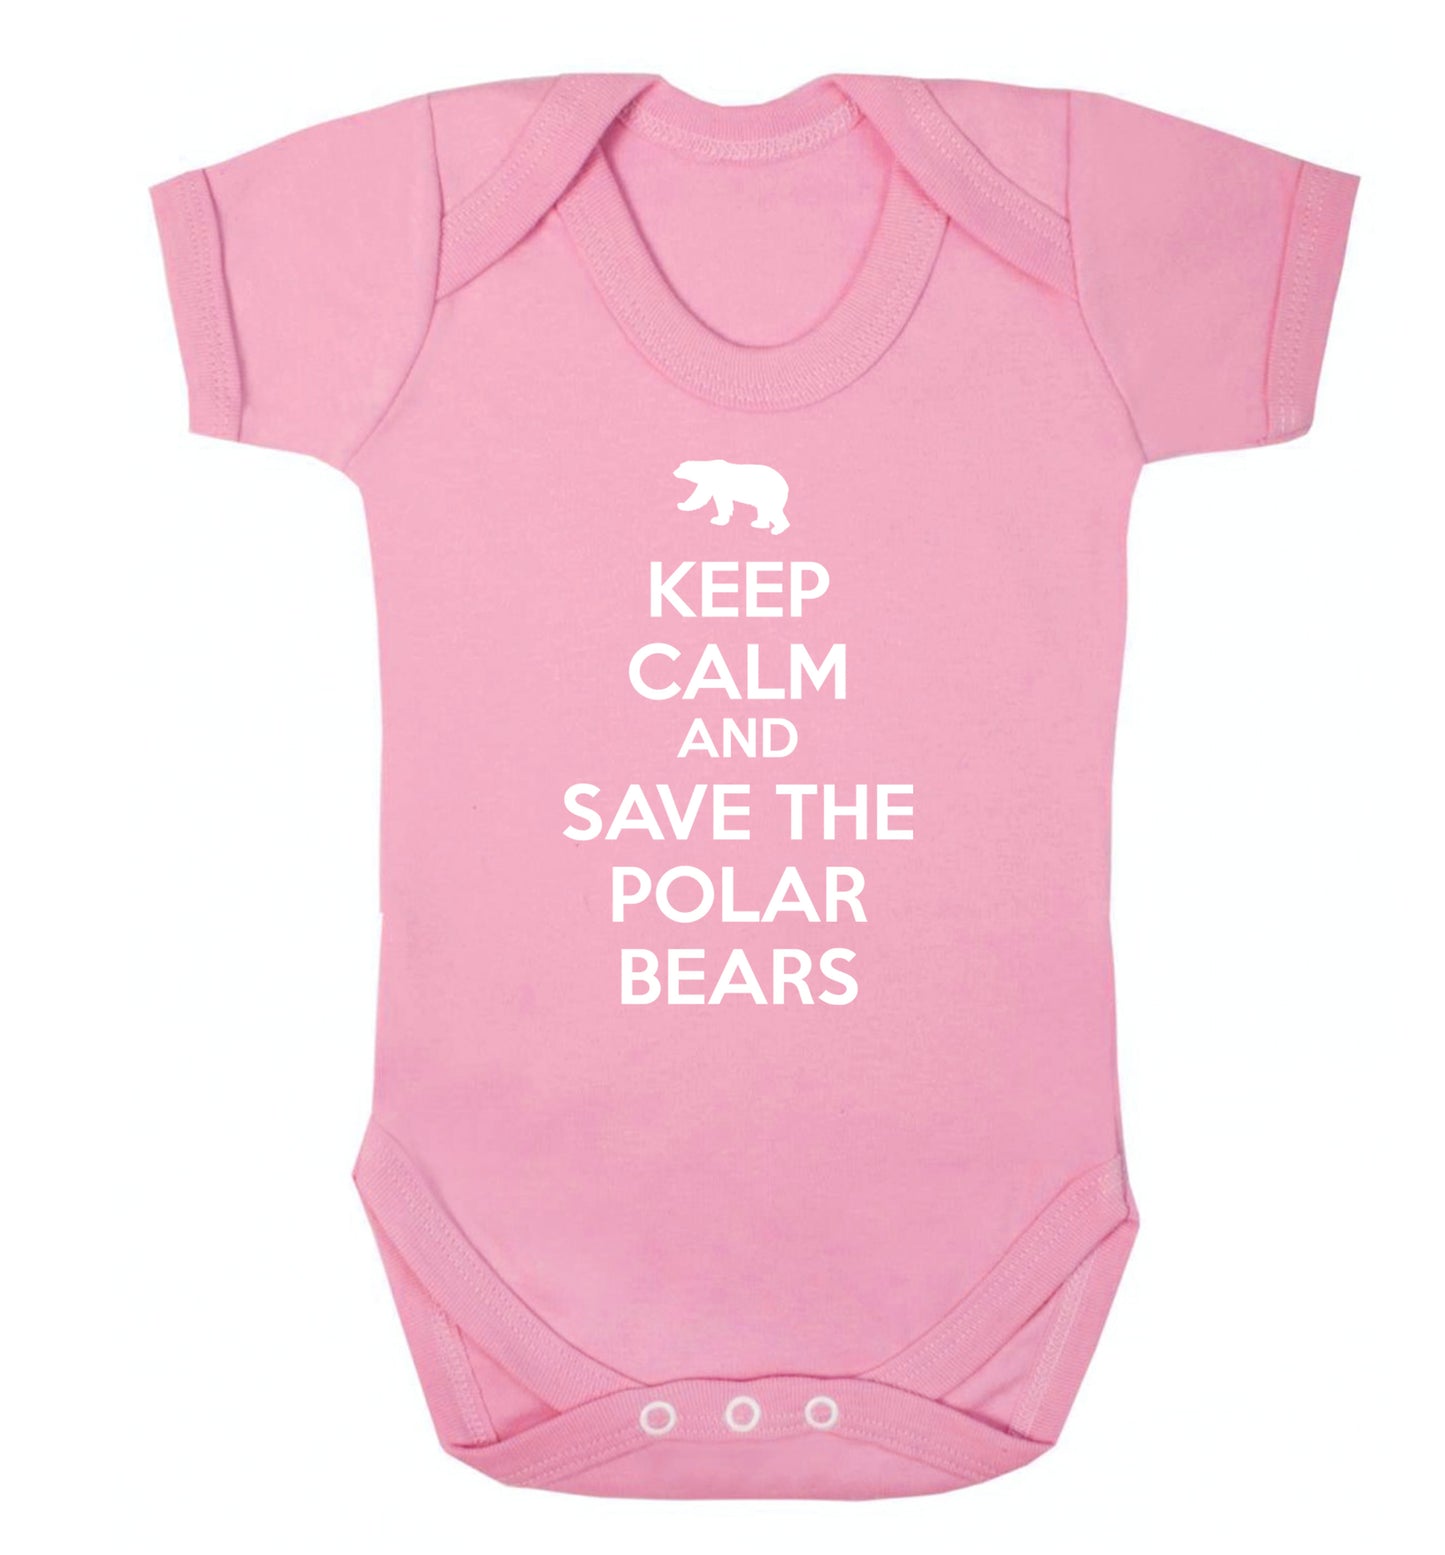 Keep calm and save the polar bears Baby Vest pale pink 18-24 months